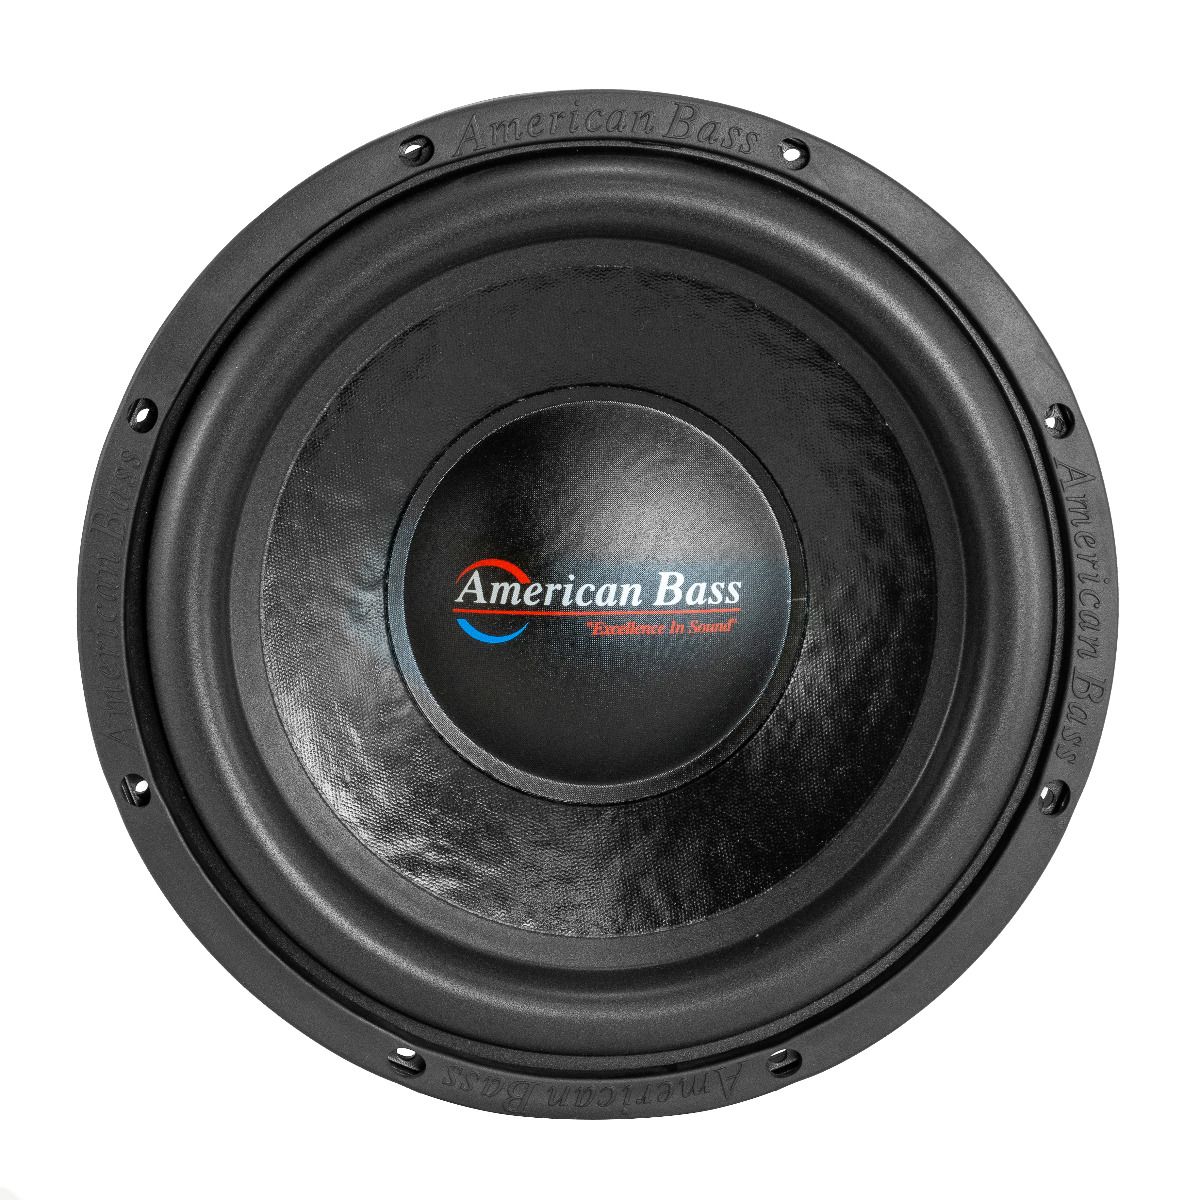 American Bass DX-12 12" Car Subwoofer 300 Watts SVC 4-Ohm